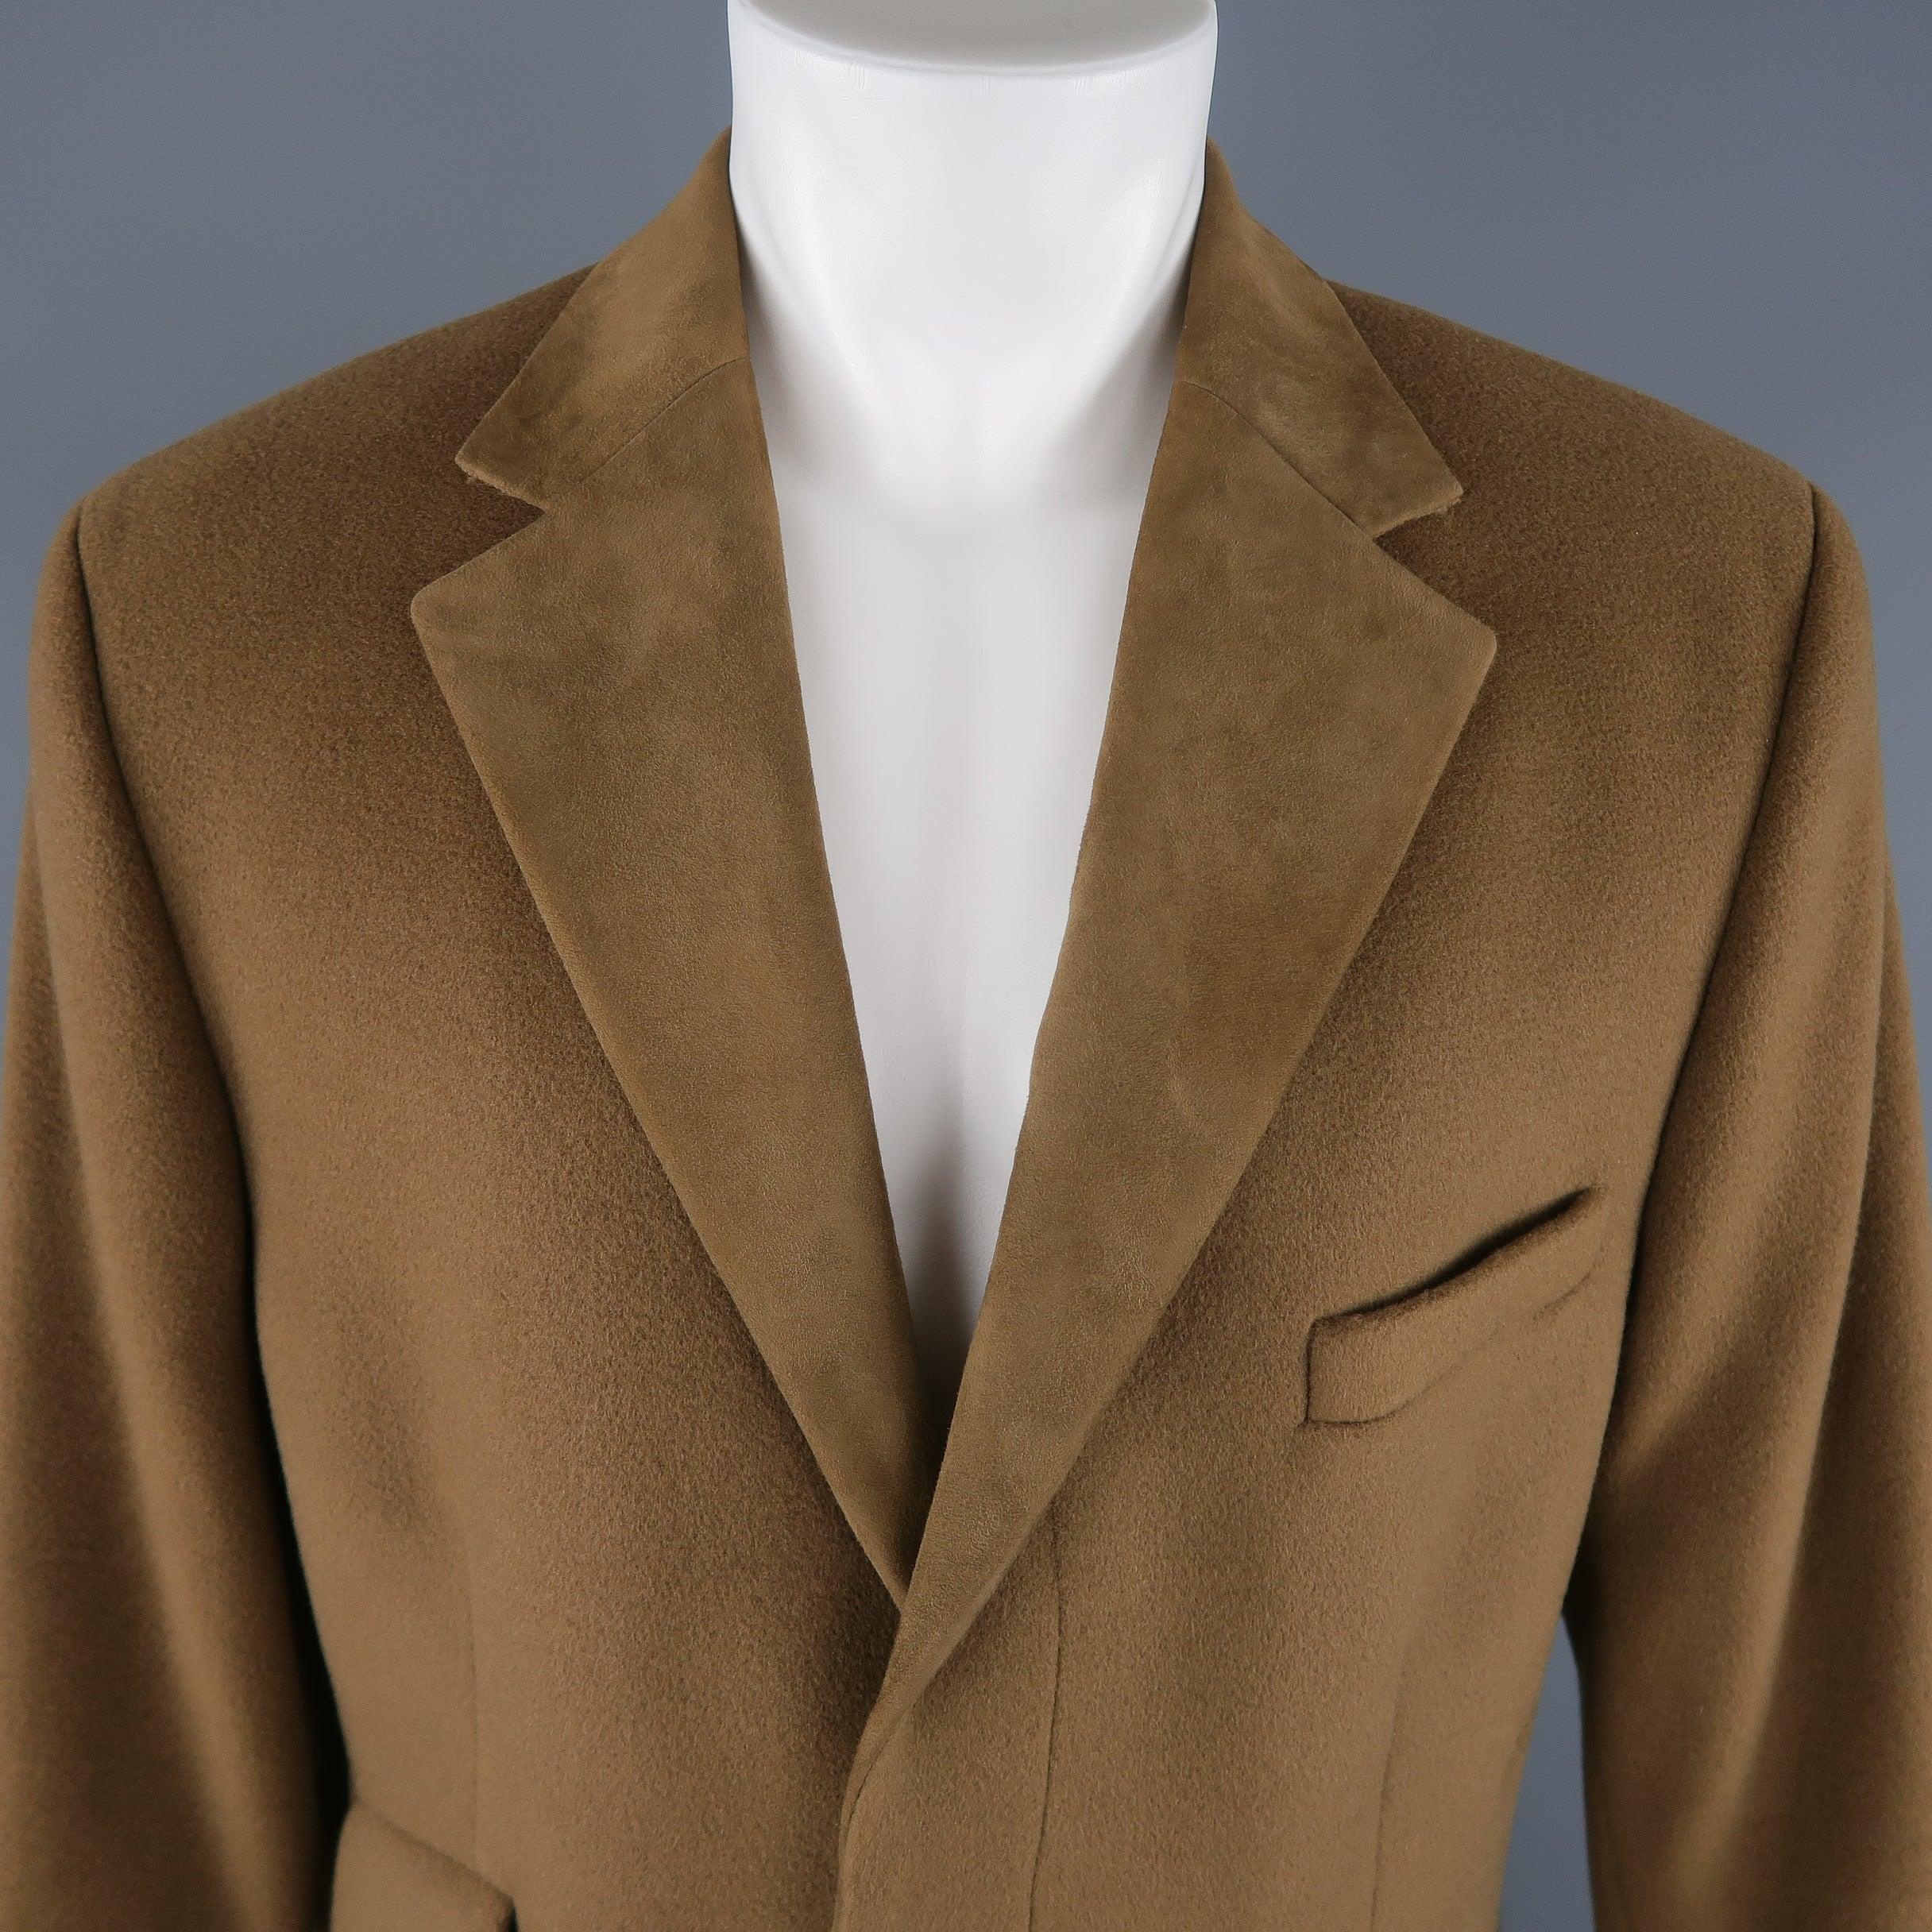 Vintage GIANNI VERSACE over coat comes in light olive green wool with a hidden placket button up closure, triple mock flap pockets, and suede notch lapel. Made in Italy.Excellent Pre-Owned Condition. 
 

 Marked:  M 
 

 Measurements: 
  Chest: 46